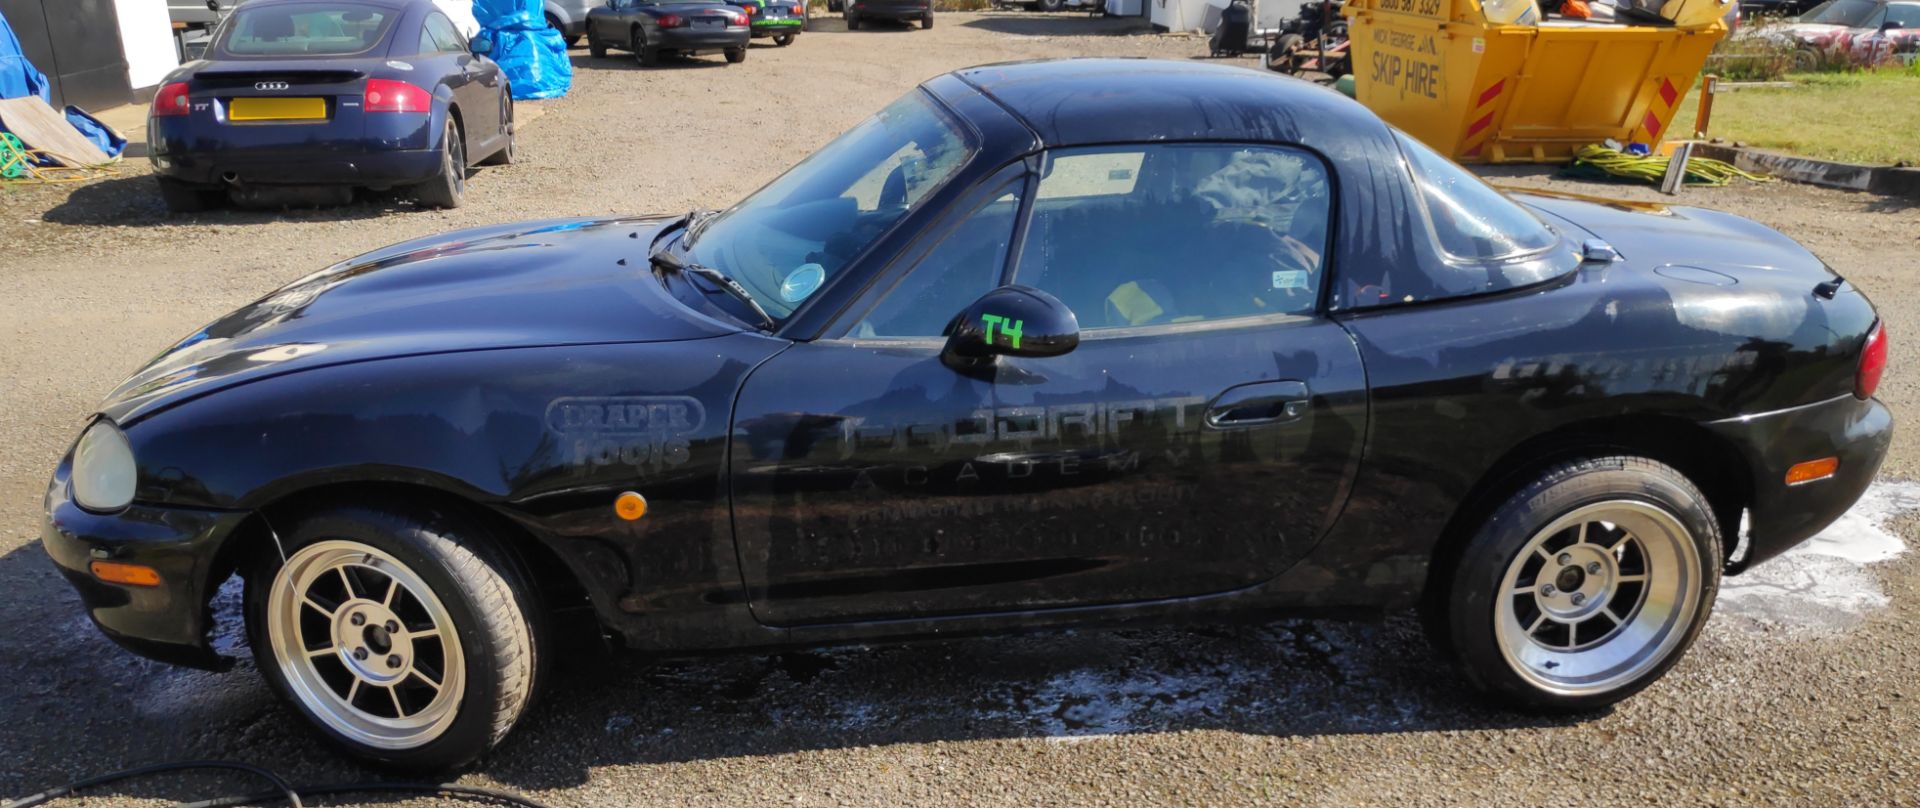 1 x 2000 Mazda MX5 Mk2 Drift Car - Includes 3 Extra Wheels/Tyres - Ref: T4 - CL682 - Location: Bedfo - Image 14 of 77